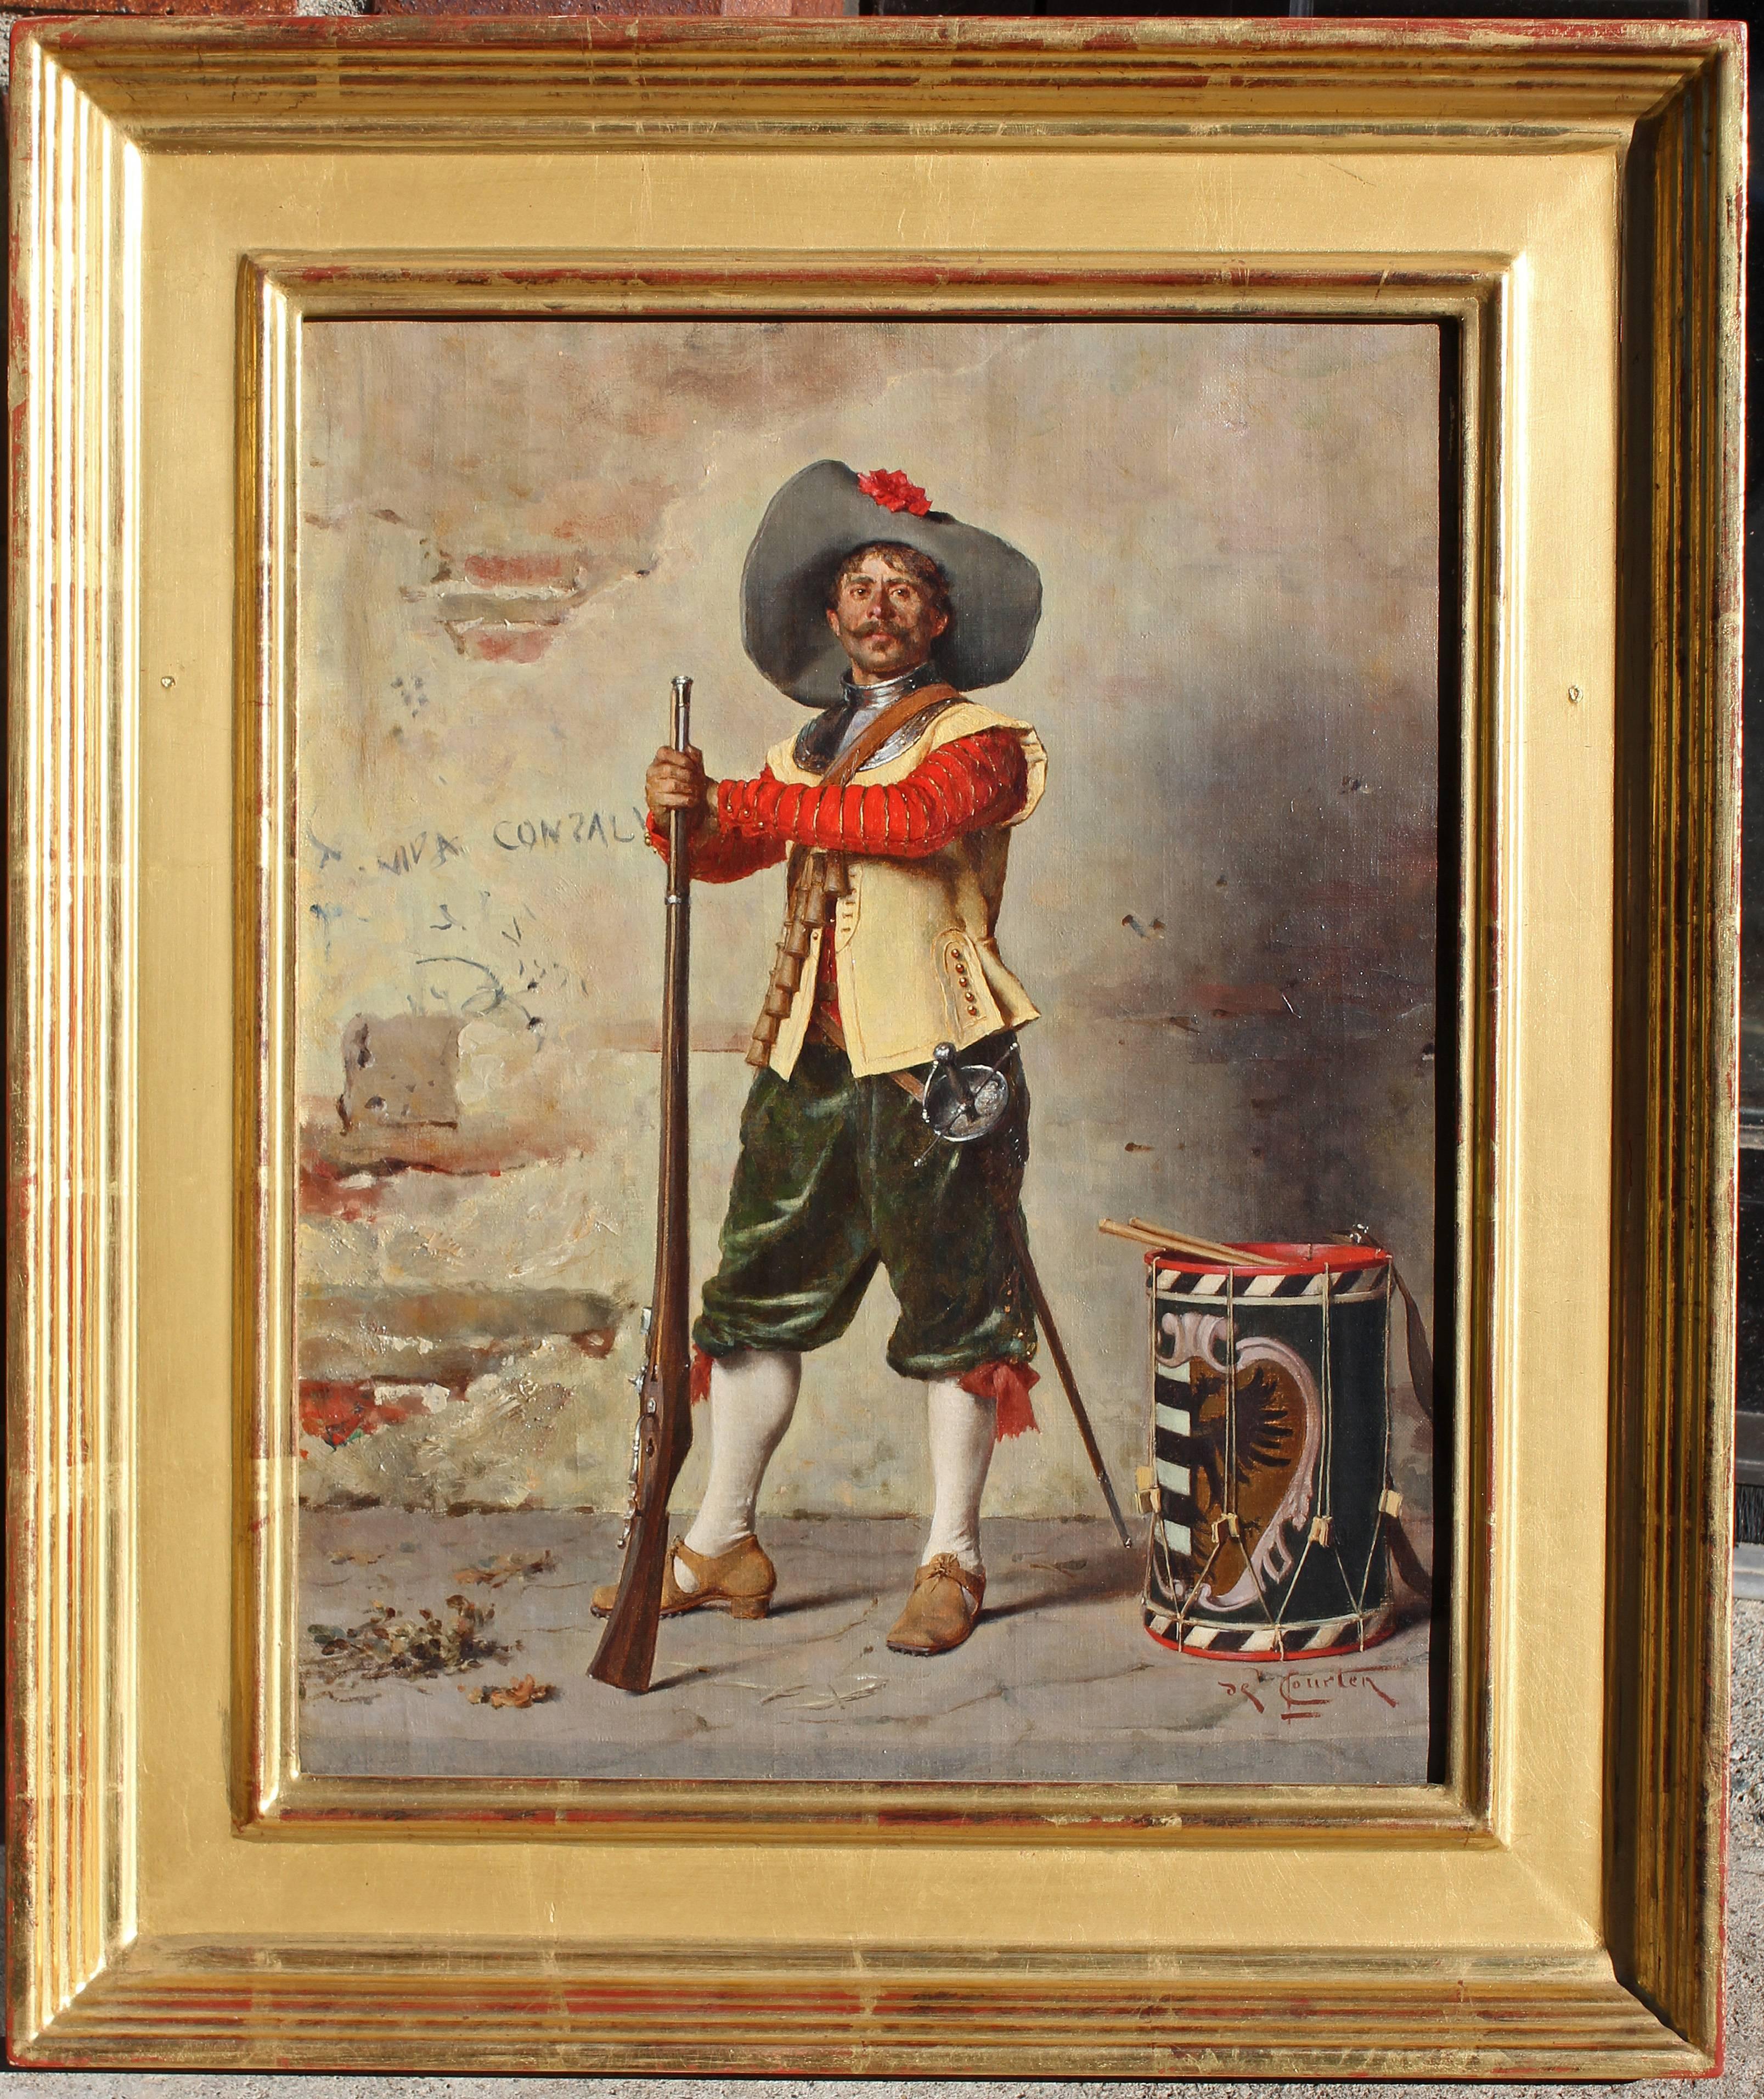 Antique 19th century oil painting, portrait of a  Cavalier by Ludovico de Courten (Italian 19th century). Oil on canvas. Late 19th century. In handmade gold leaf period style frame.